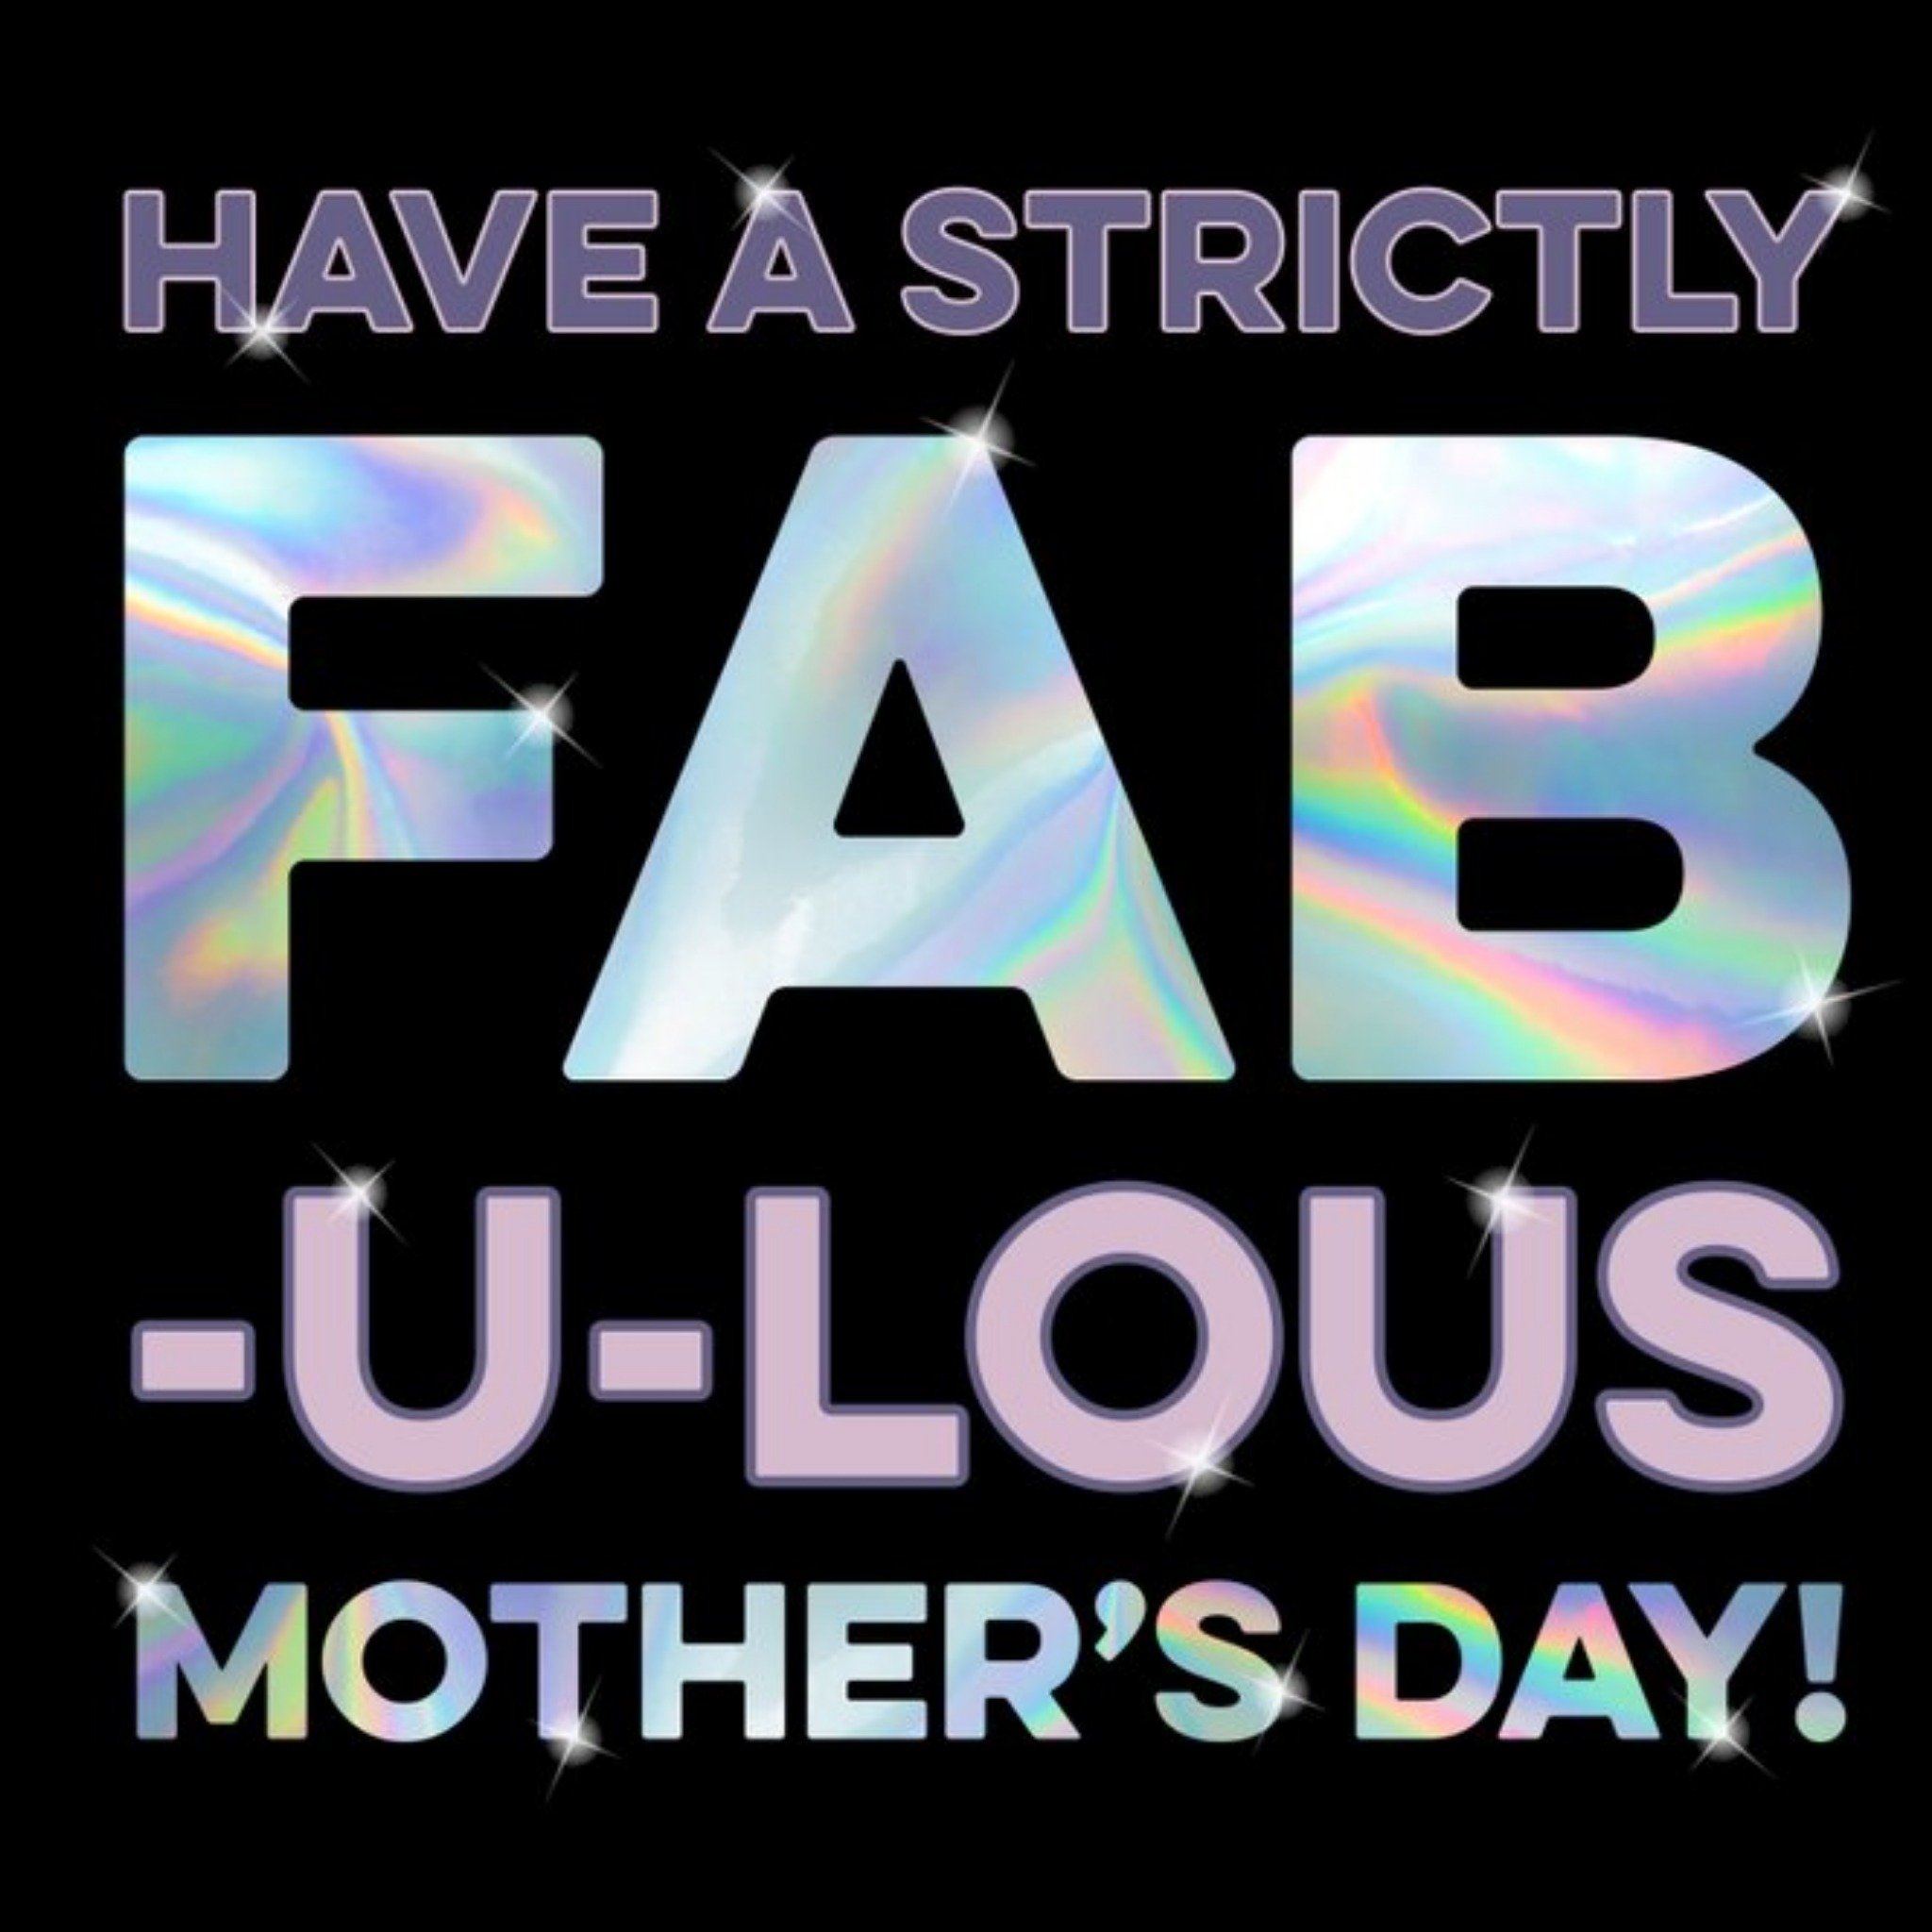 Strictly Come Dancing Have A Strictly Fabulous Mothers Day Card, Square